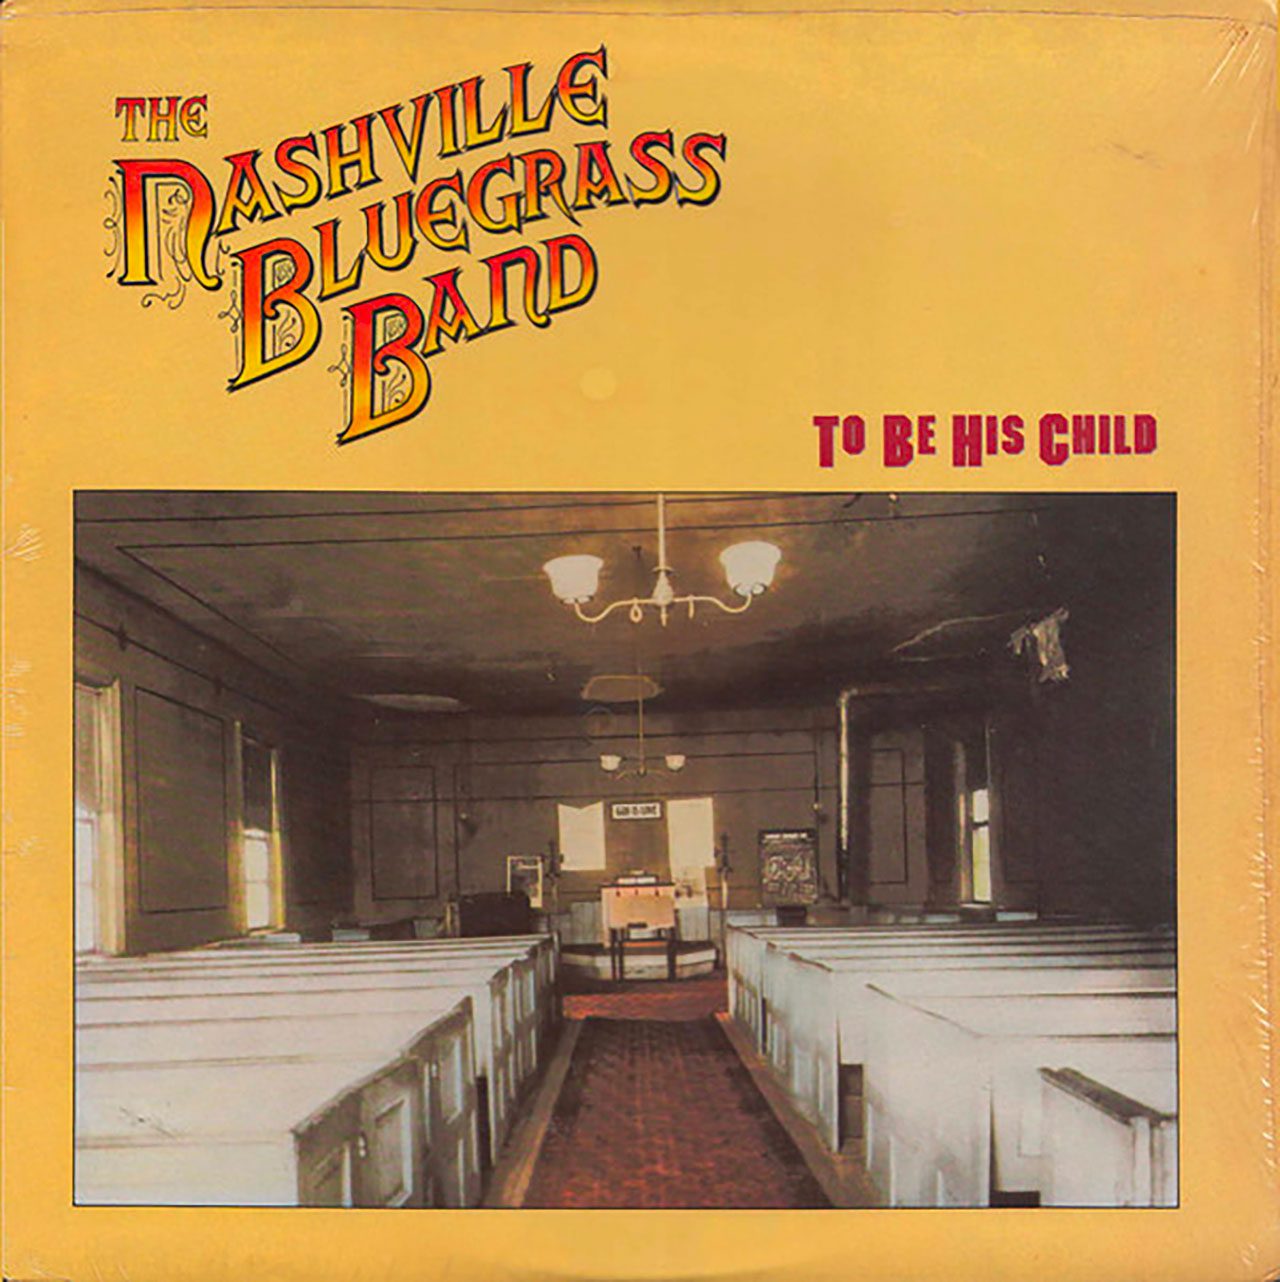 The Nashville Bluegrass Band – To Be His Child cover album